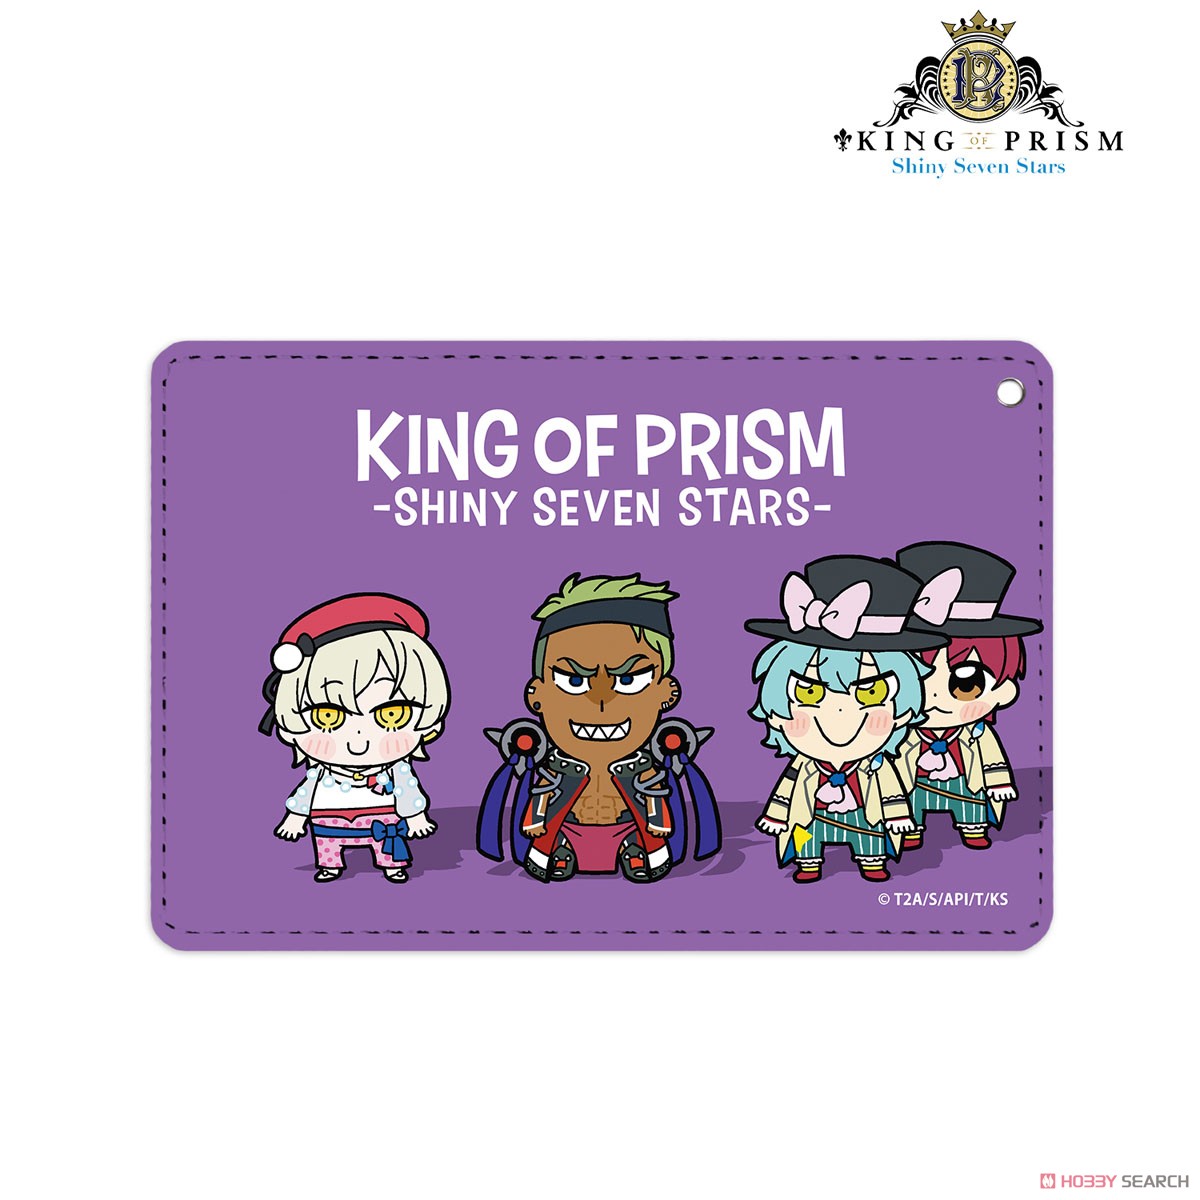 KING OF PRISM -Shiny Seven Stars- KING OF PRISM×大川ぶくぶ Schwarz Rose 1ポケットパスケース (キャラクターグッズ) 商品画像1